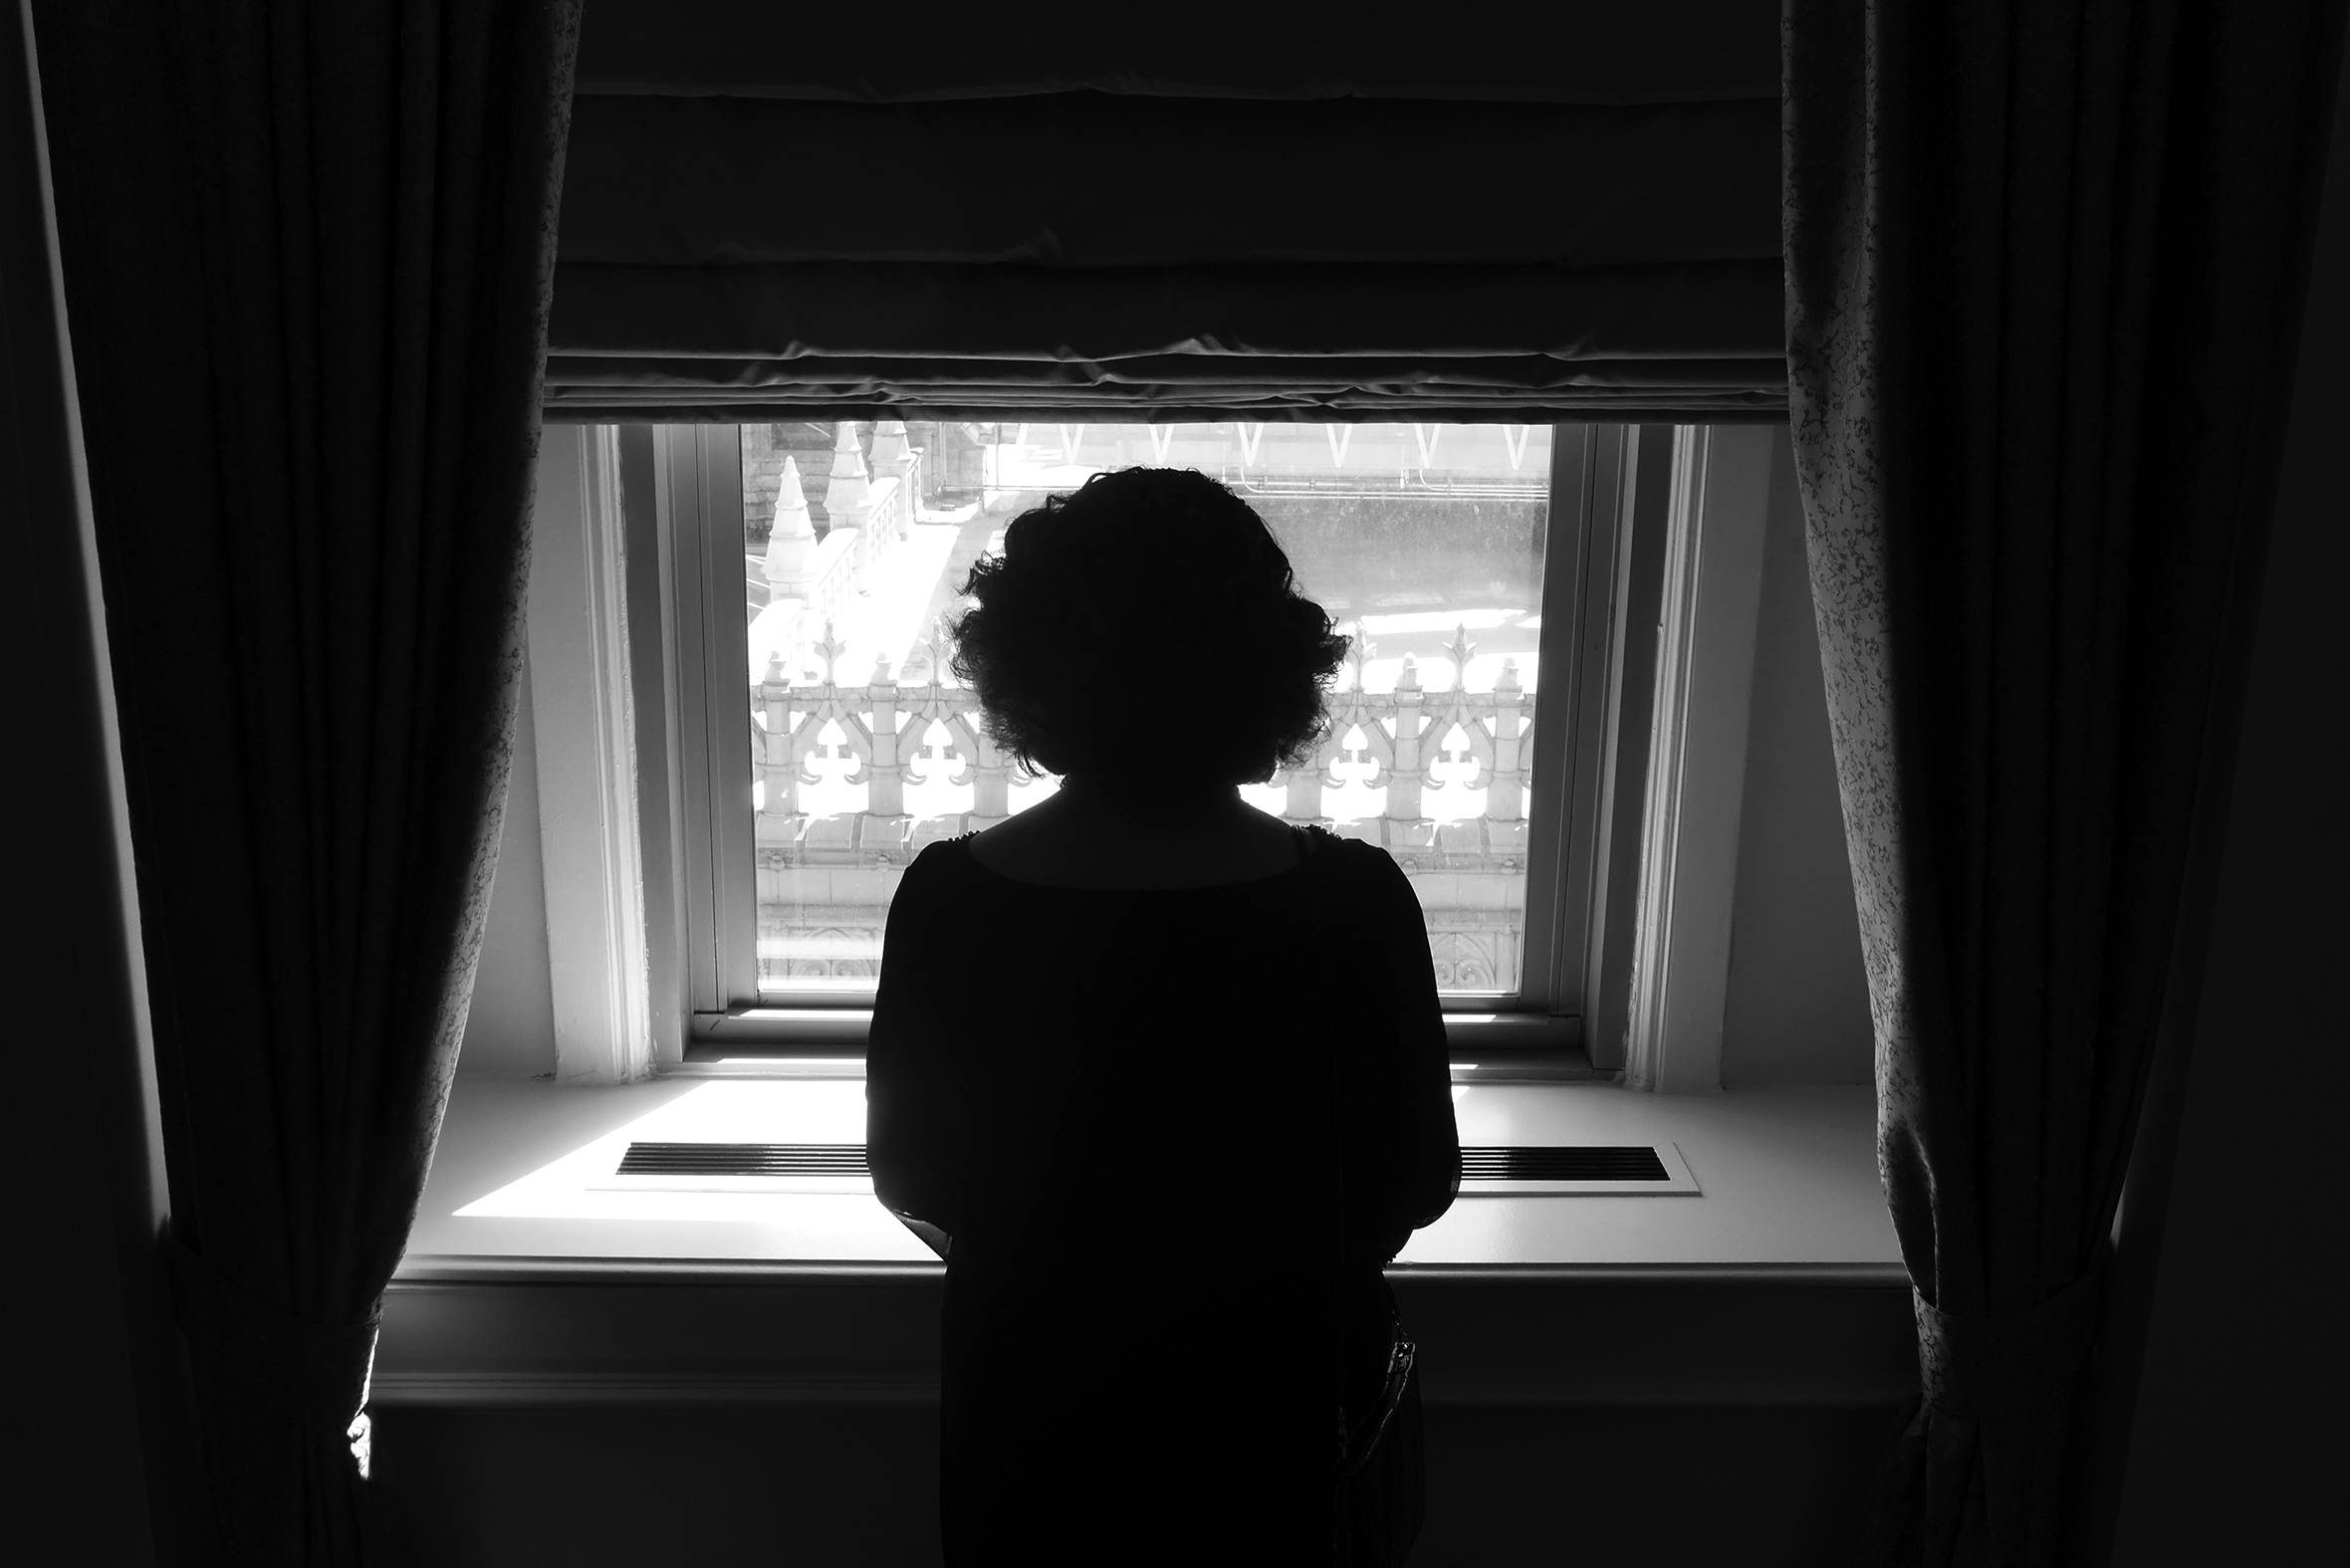 The back view of a woman in a dark room looking out a window In the daytime. The window has heavy curtains pulled to the sides and a shade on top. The windowsill is white and very deep, with a long radiator cover across the center.